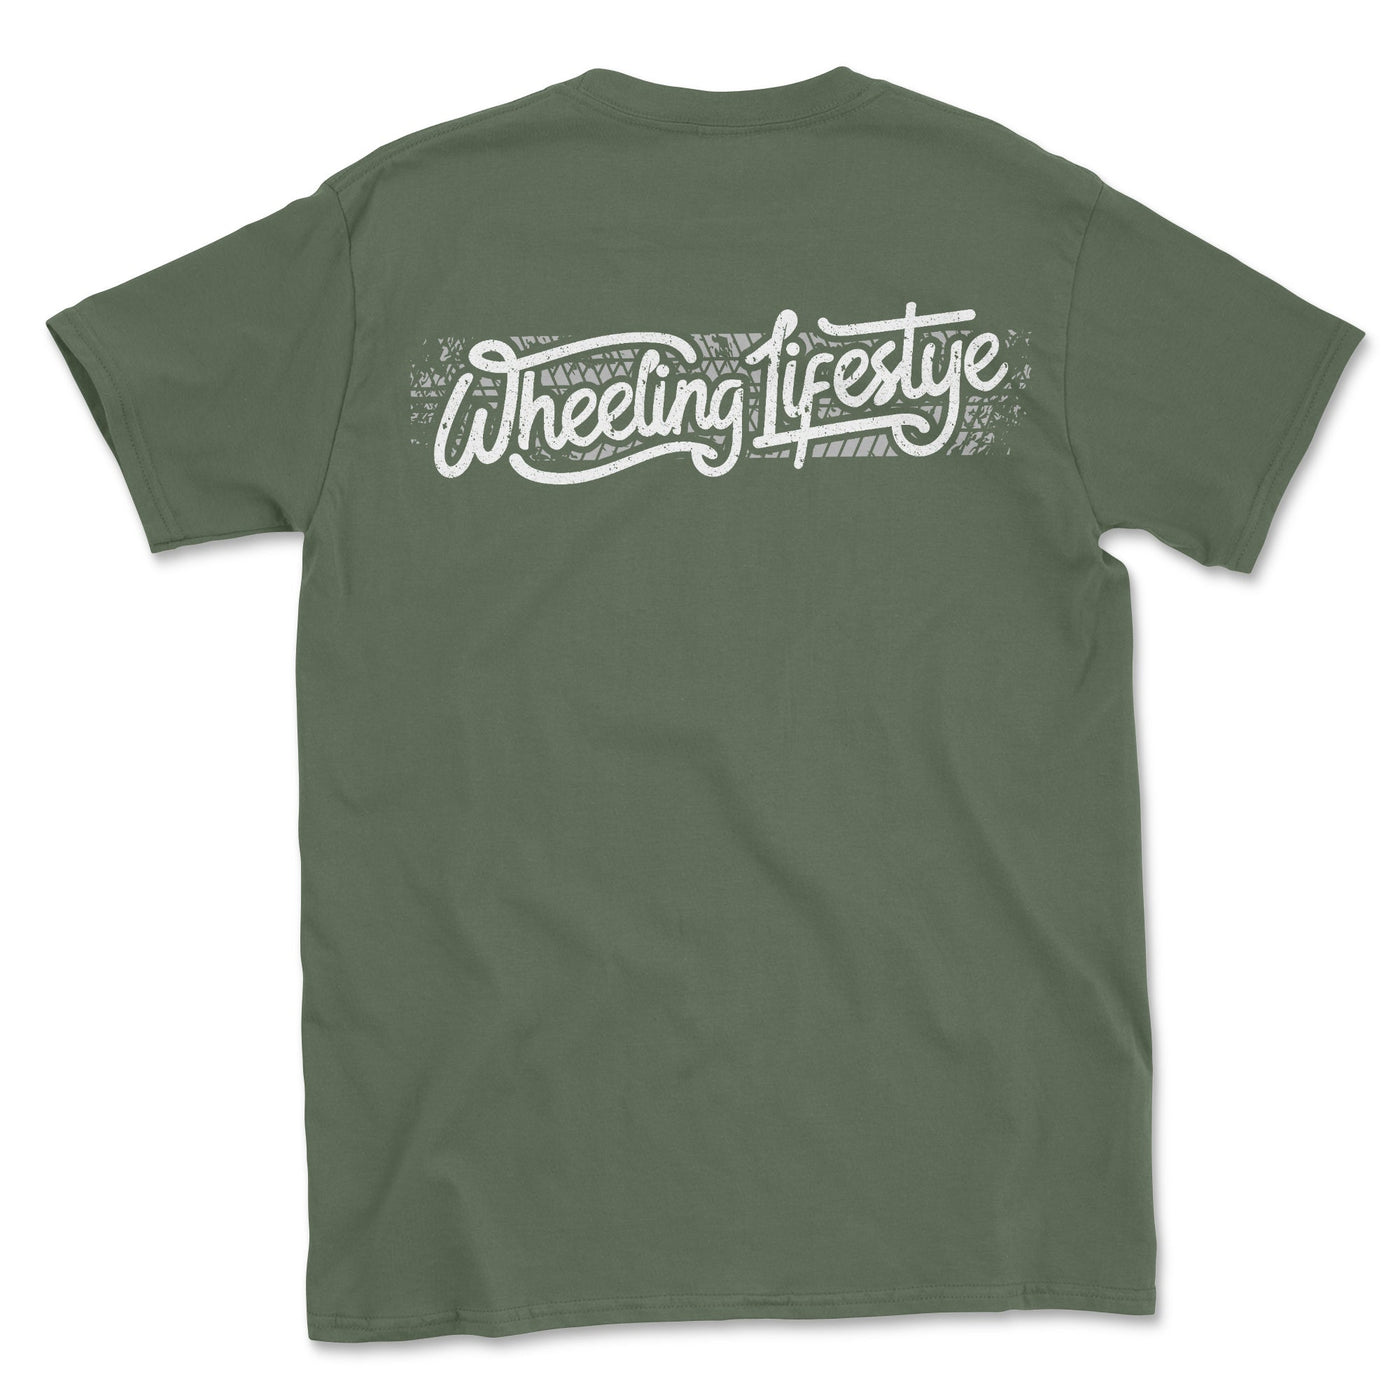 Wheeling Lifestyle Graphic Tee - Goats Trail Off-Road Apparel Company